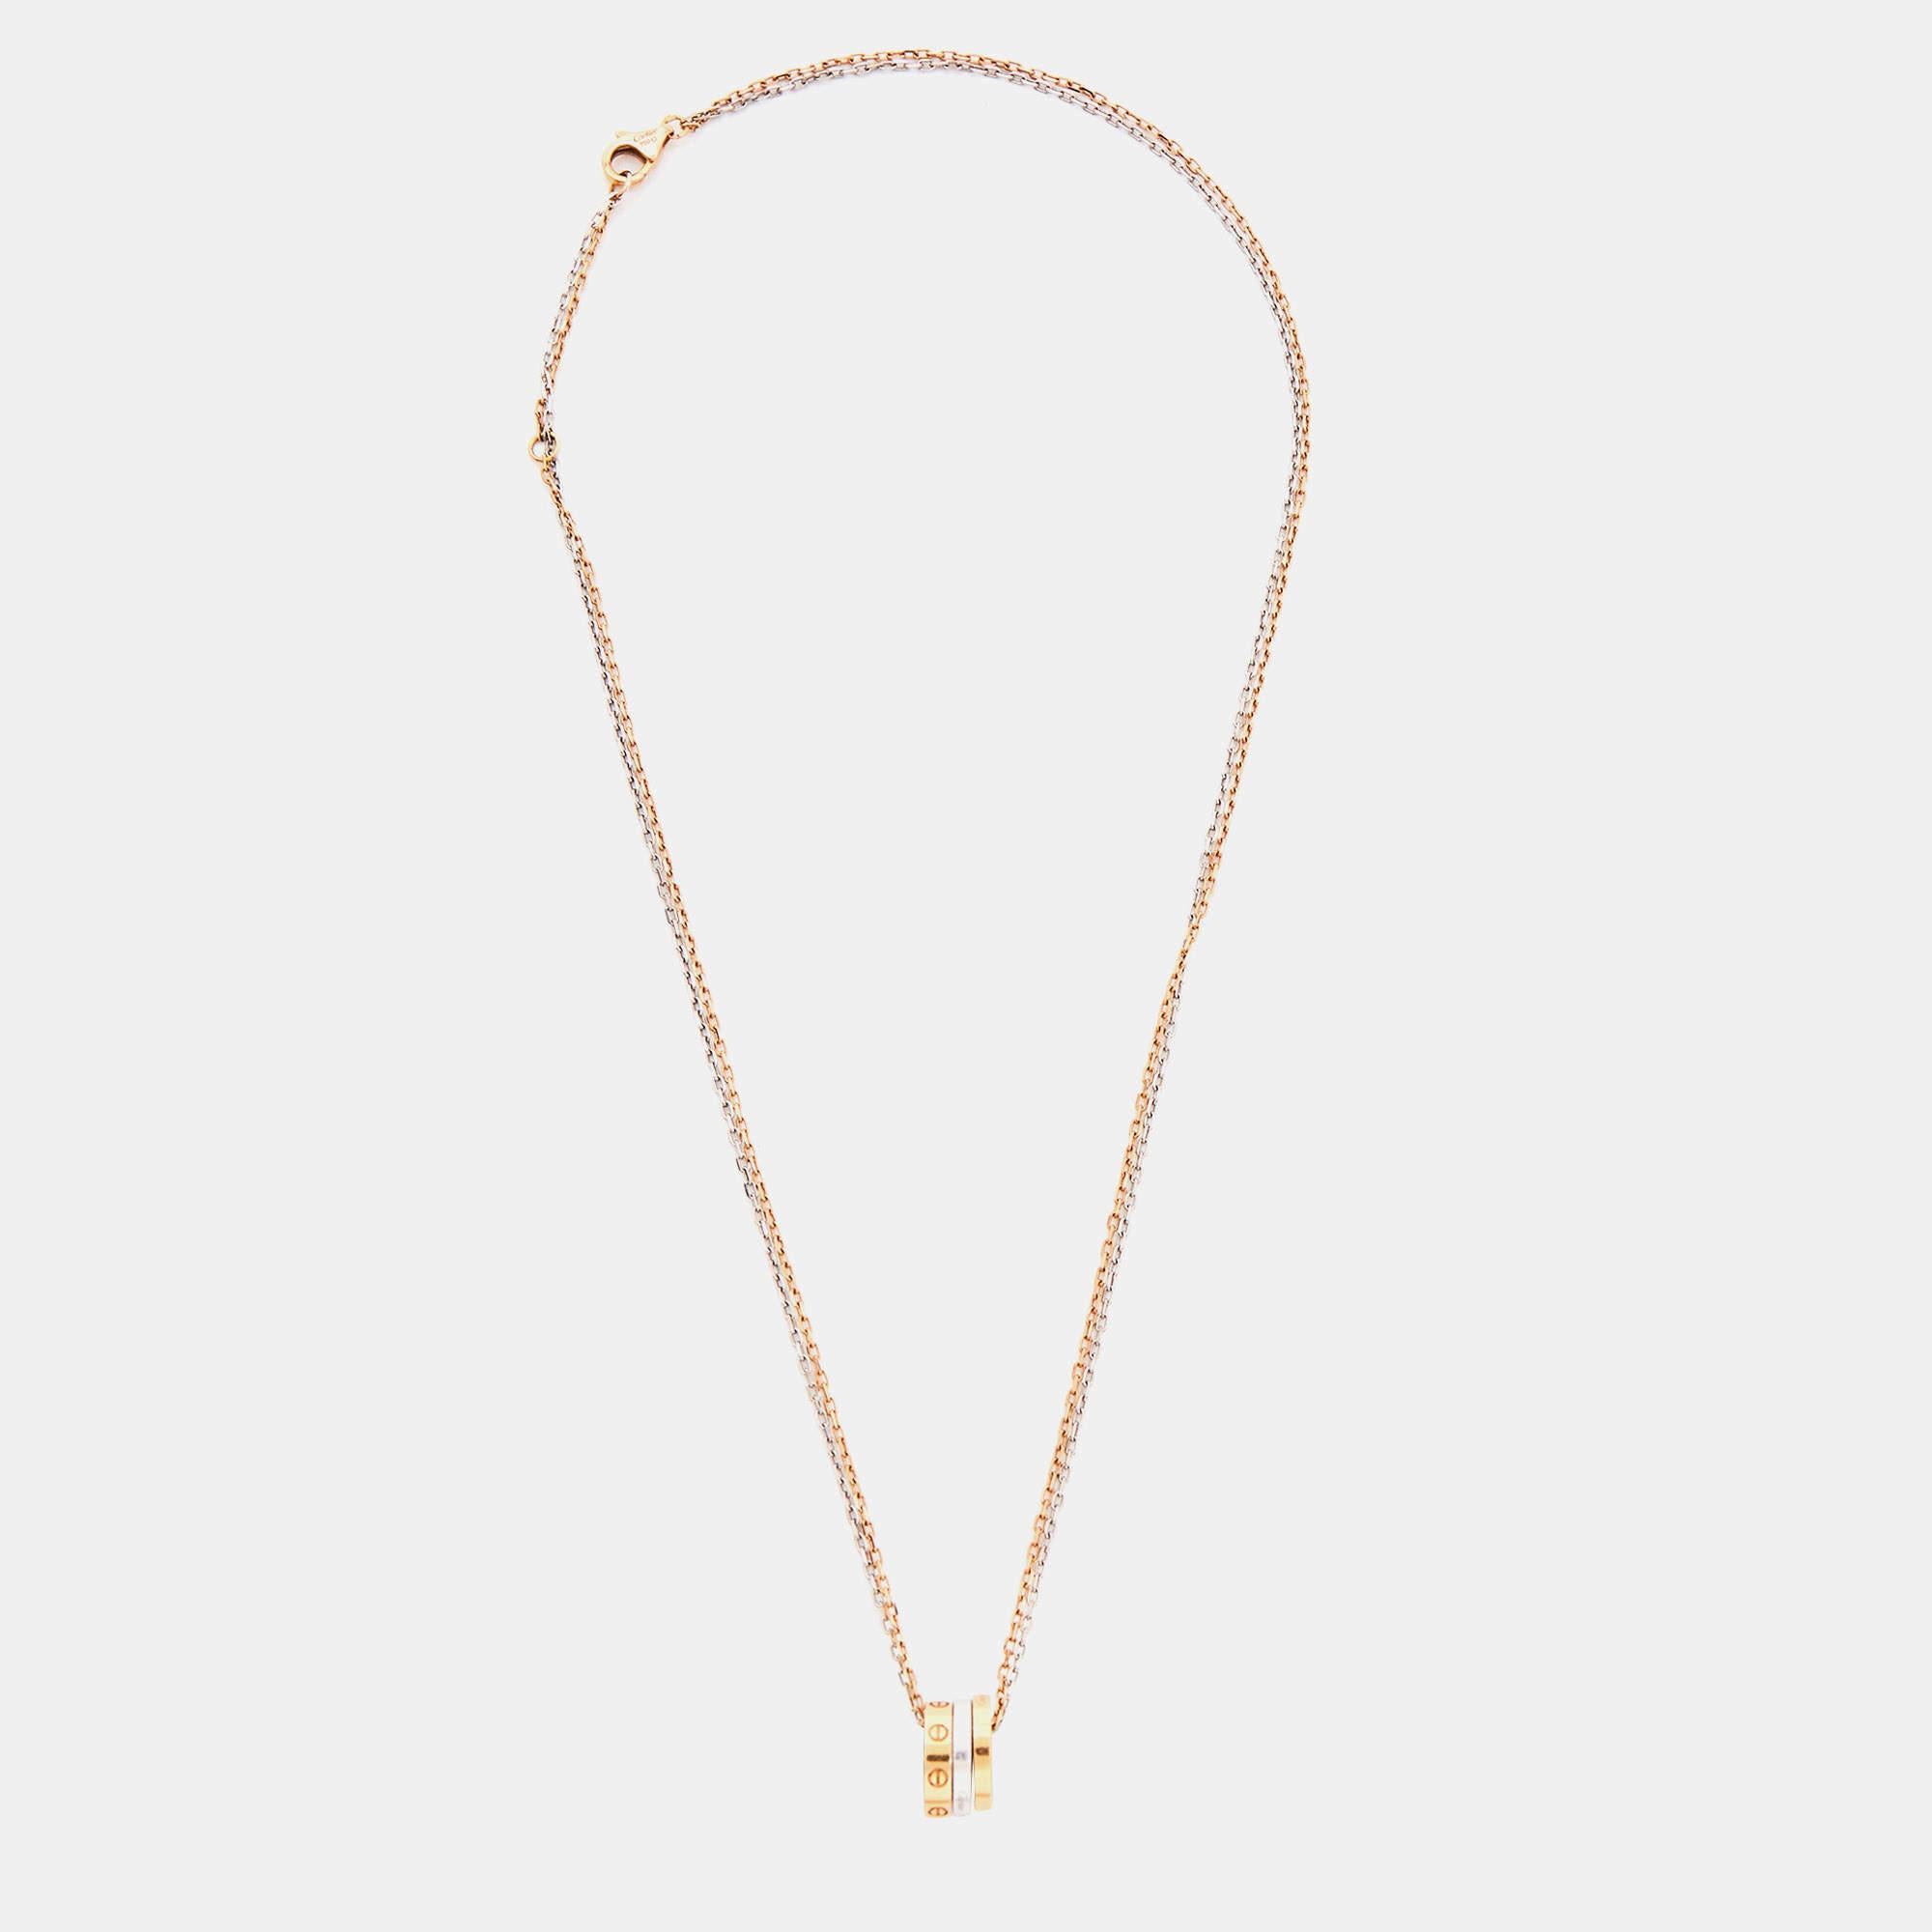 Aesthetic Movement Cartier Love Diamond 18k Two Tone Gold Double Chain Necklace For Sale